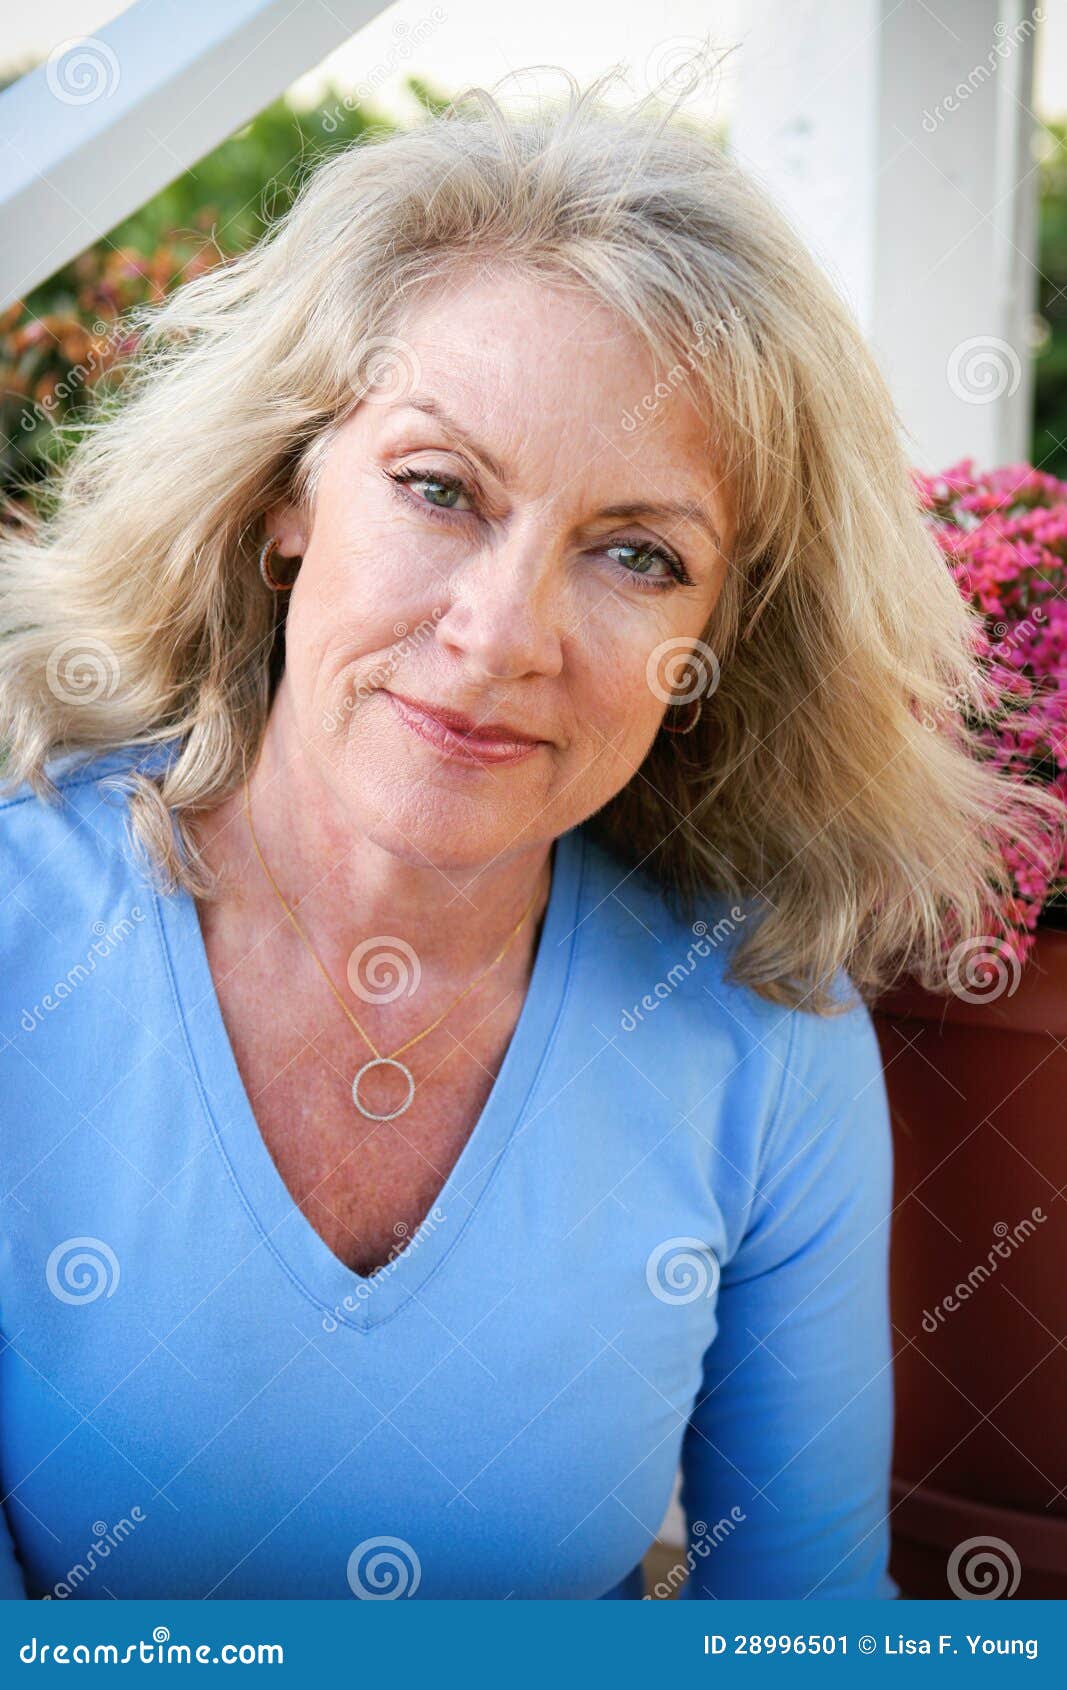 Beautiful Middle-Age Woman stock image. Image of happy - 28996501